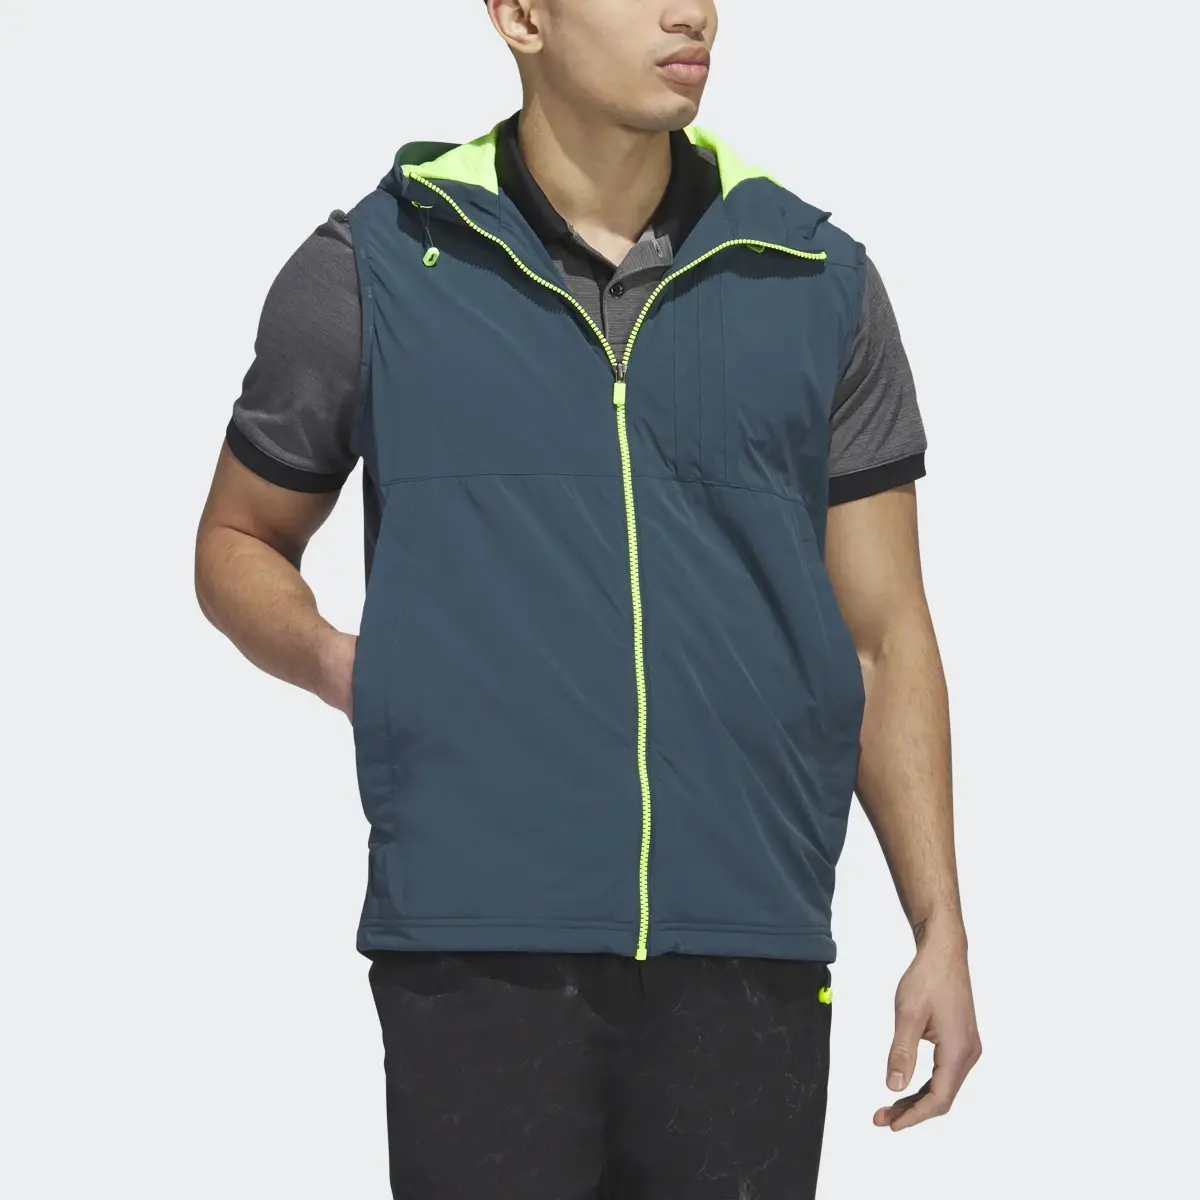 Adidas Ultimate365 Tour WIND.RDY Vest. 1